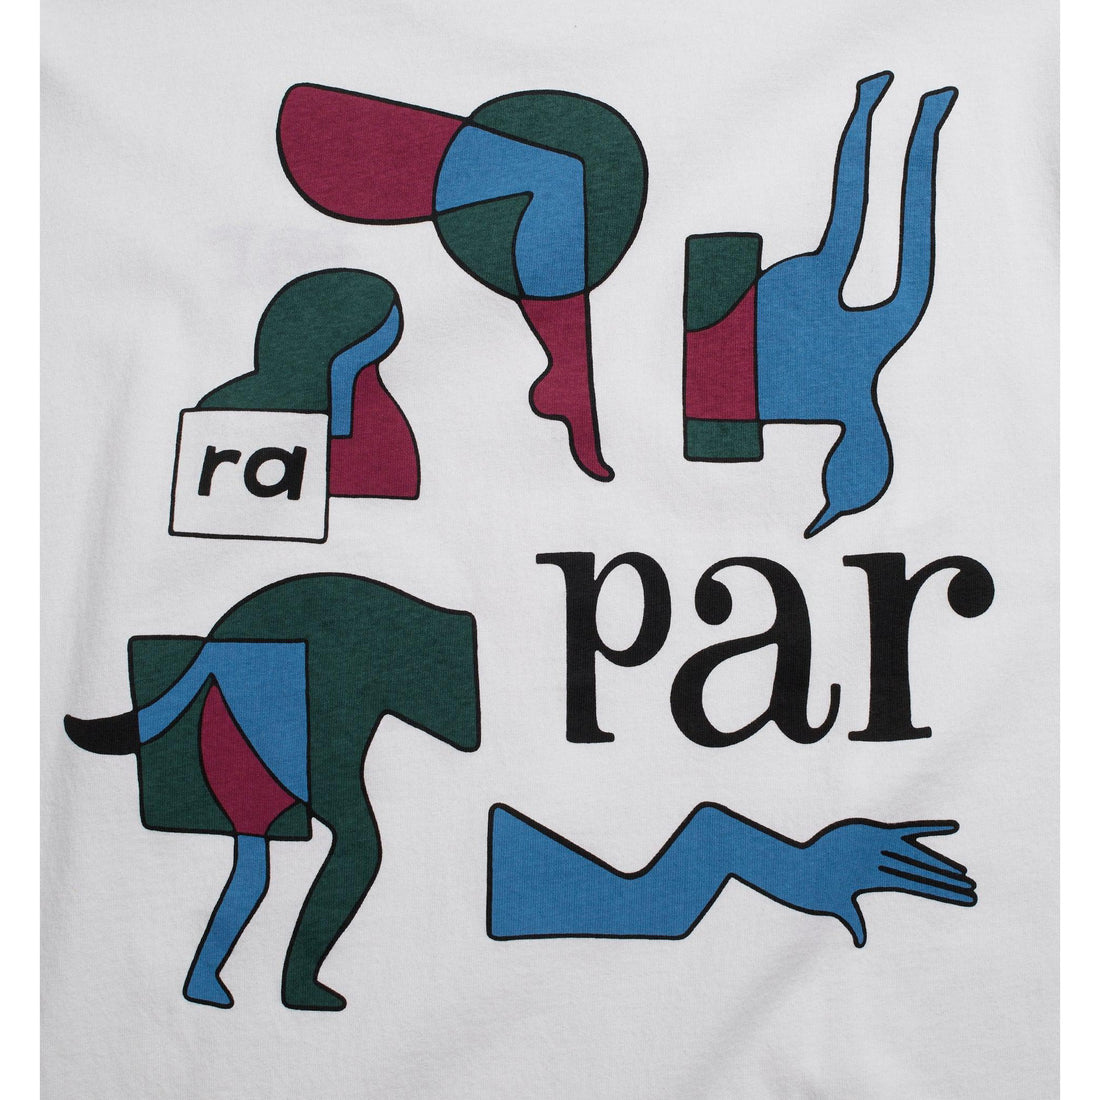 BY PARRA - RUG PULL TEE - WHITE